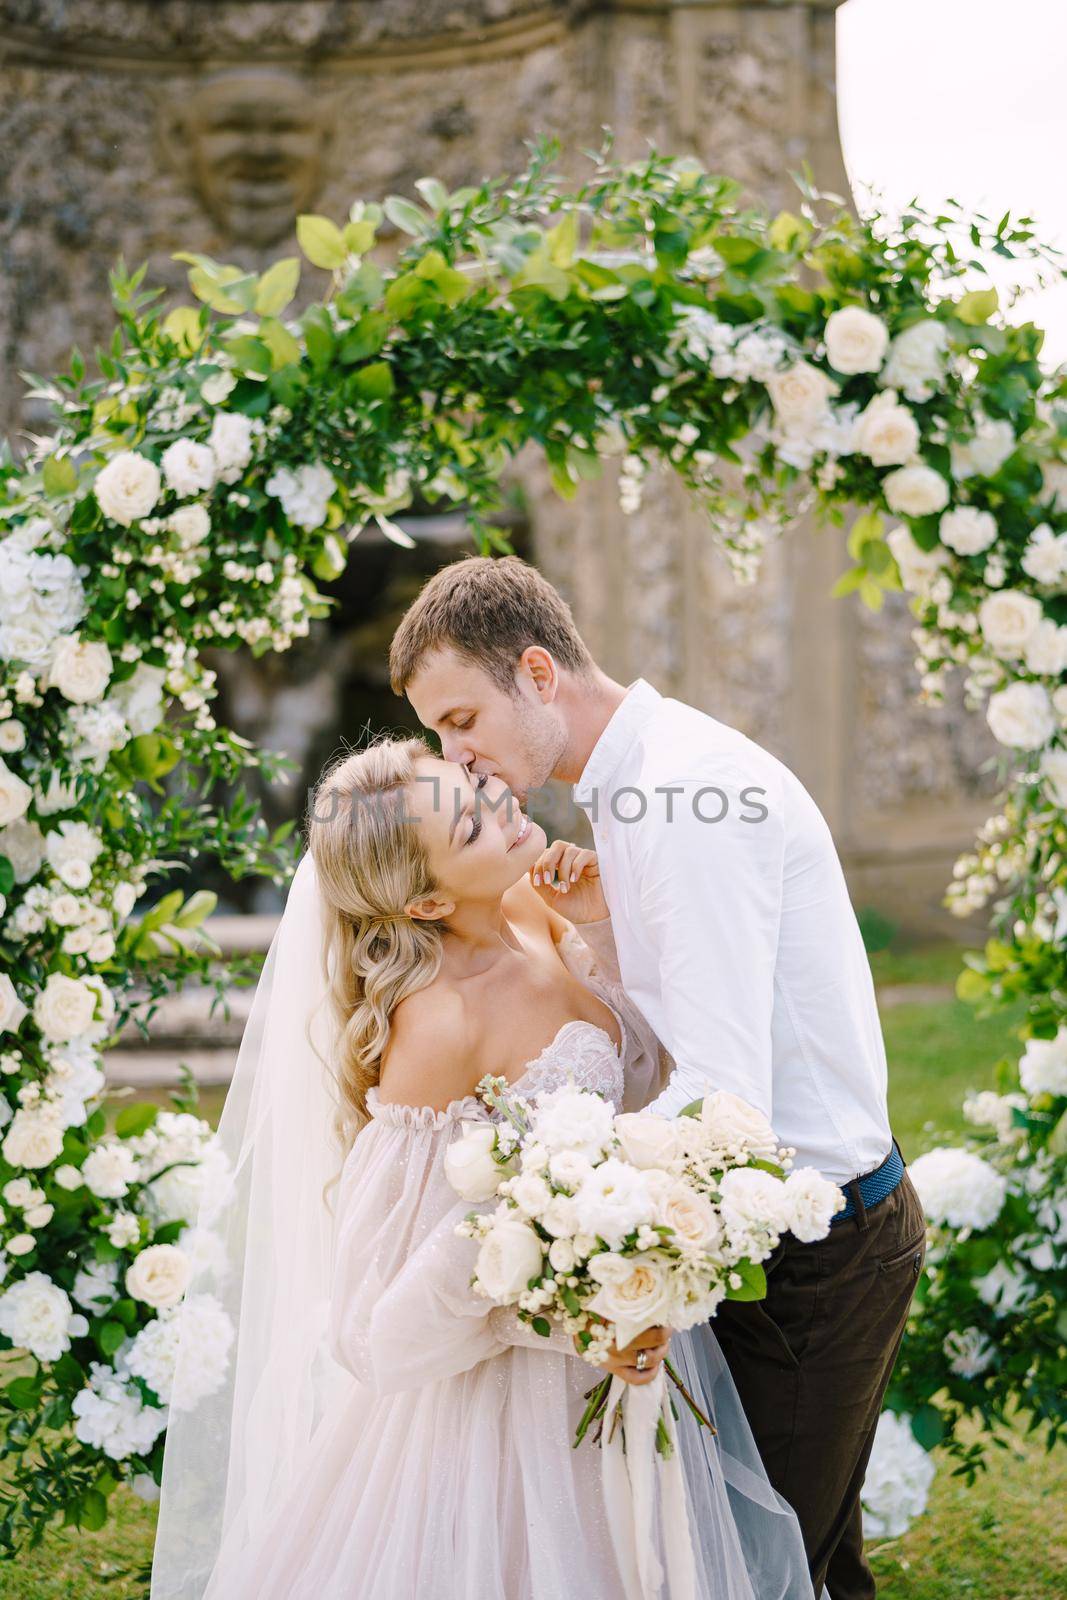 Wedding at an old winery villa in Tuscany, Italy. Round wedding arch decorated with white flowers and greenery in front of an ancient Italian architecture. The wedding couple is kissing.